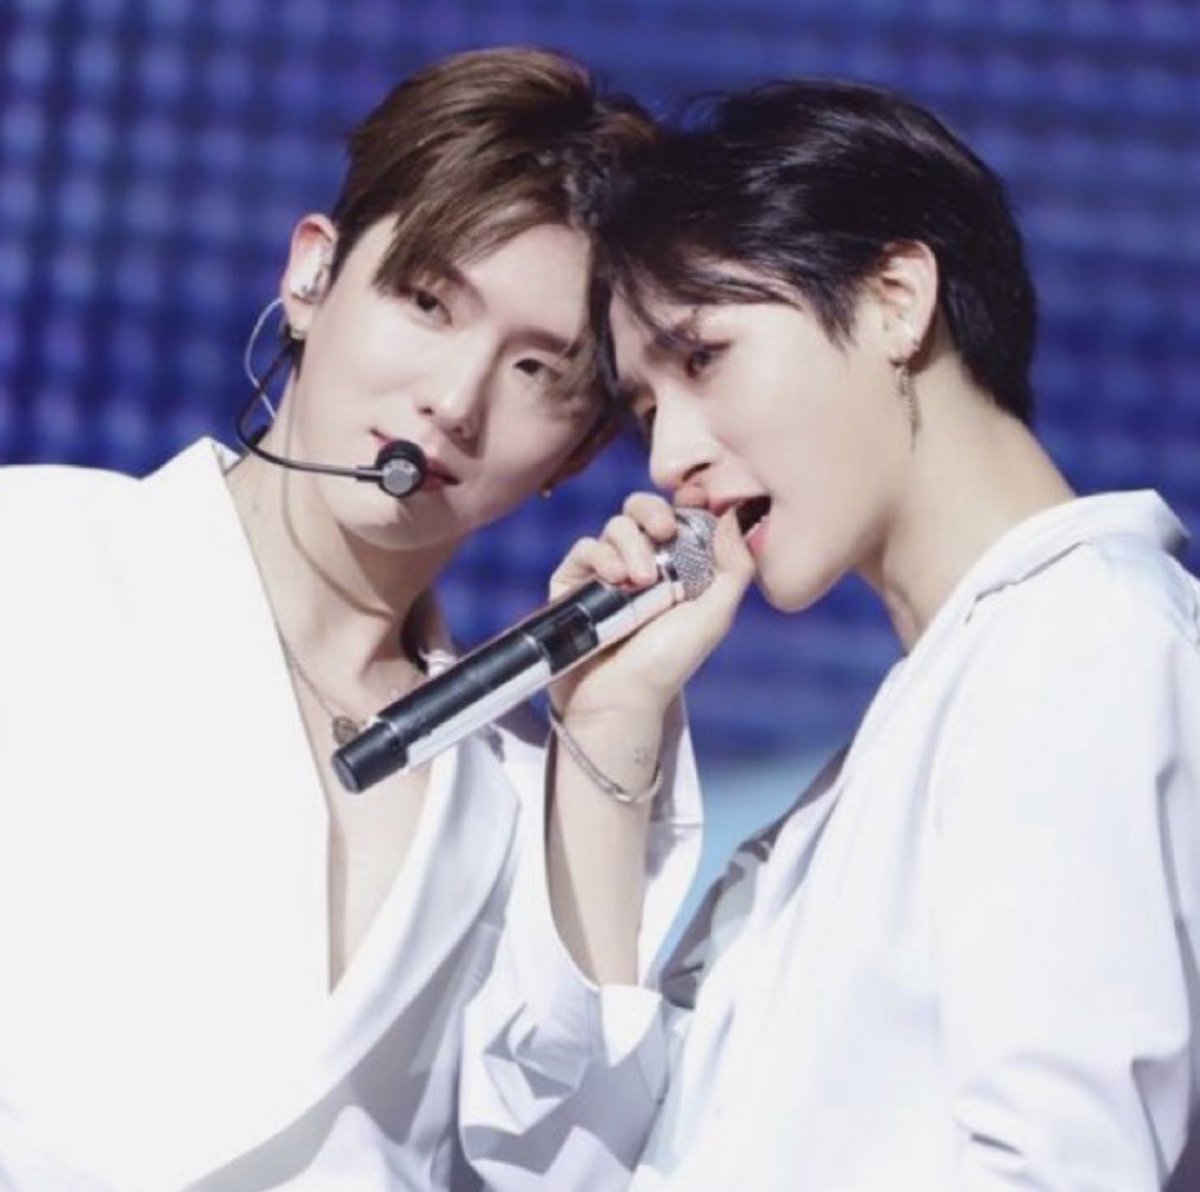 changki- crumbs crumbs crumbs - they act awkward around eachother be everyone knows they have so much love for eachother - ‘your the maknae but it seemed like you become a leader because of the tour’